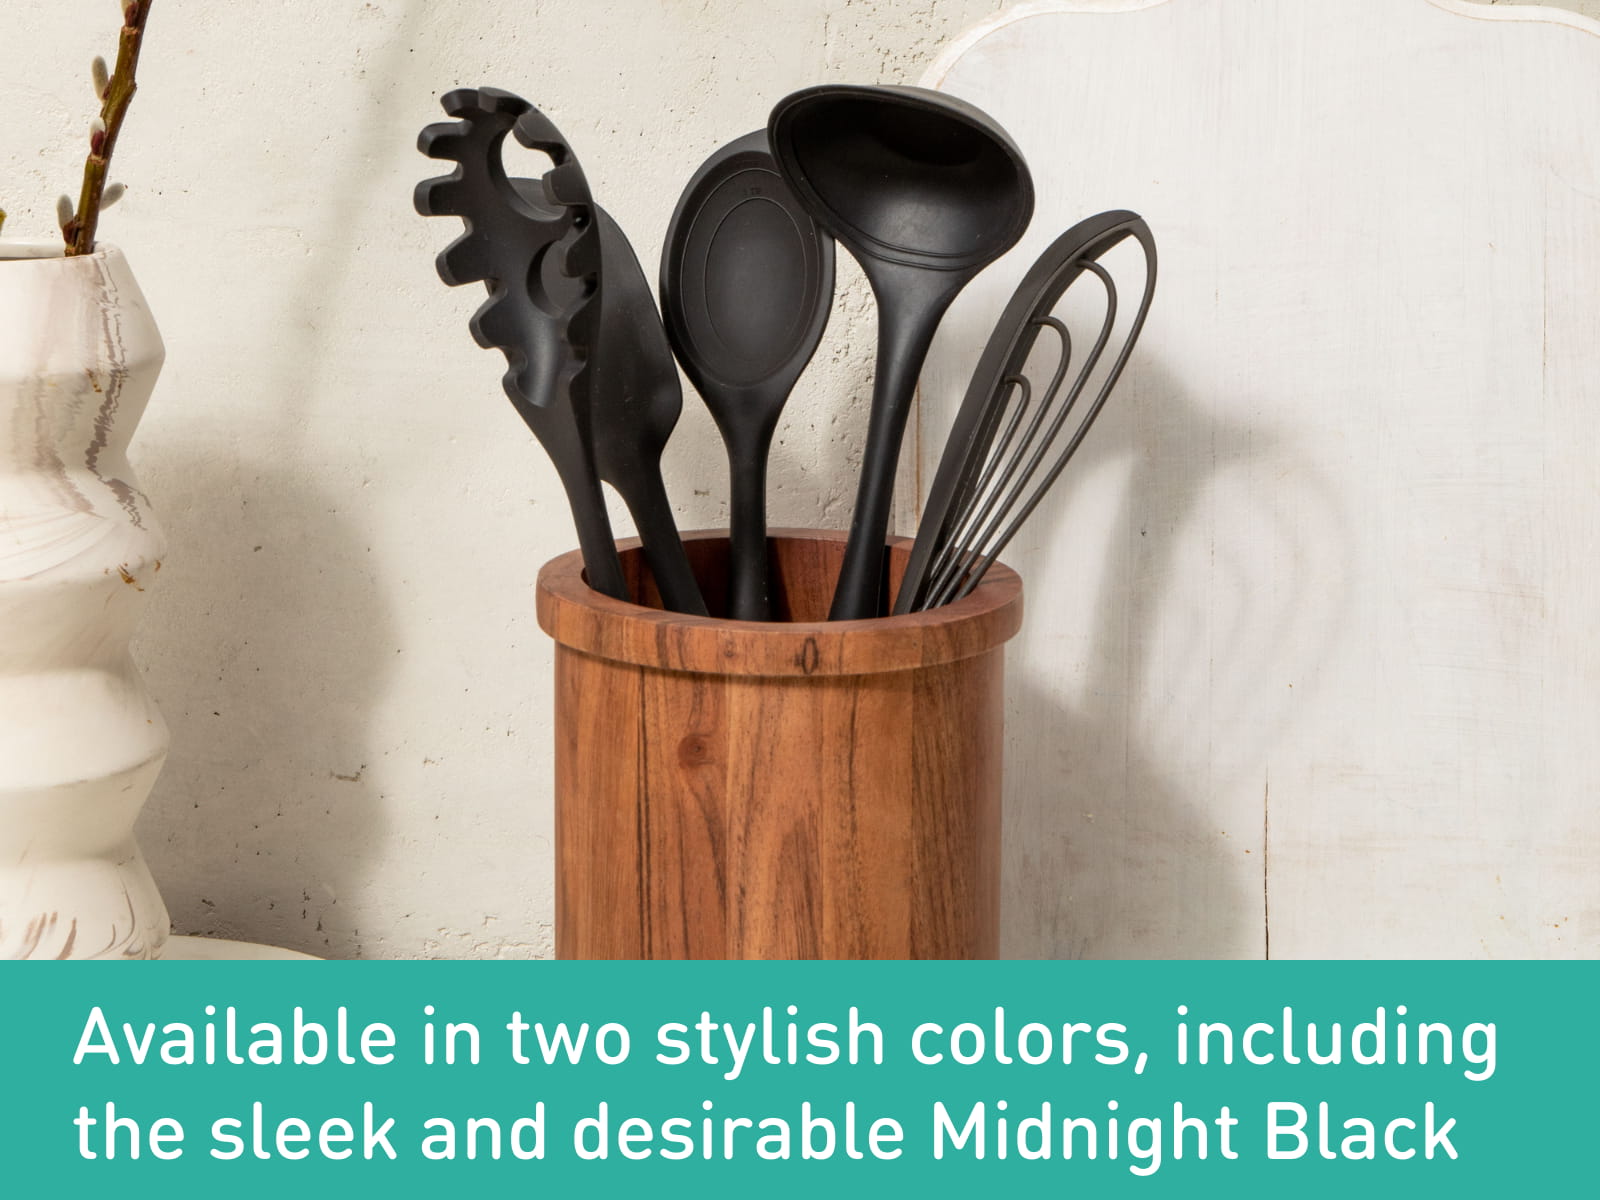 Calphalon 3 Wooden Slotted Utensils 2 Spoons 1 Spatula